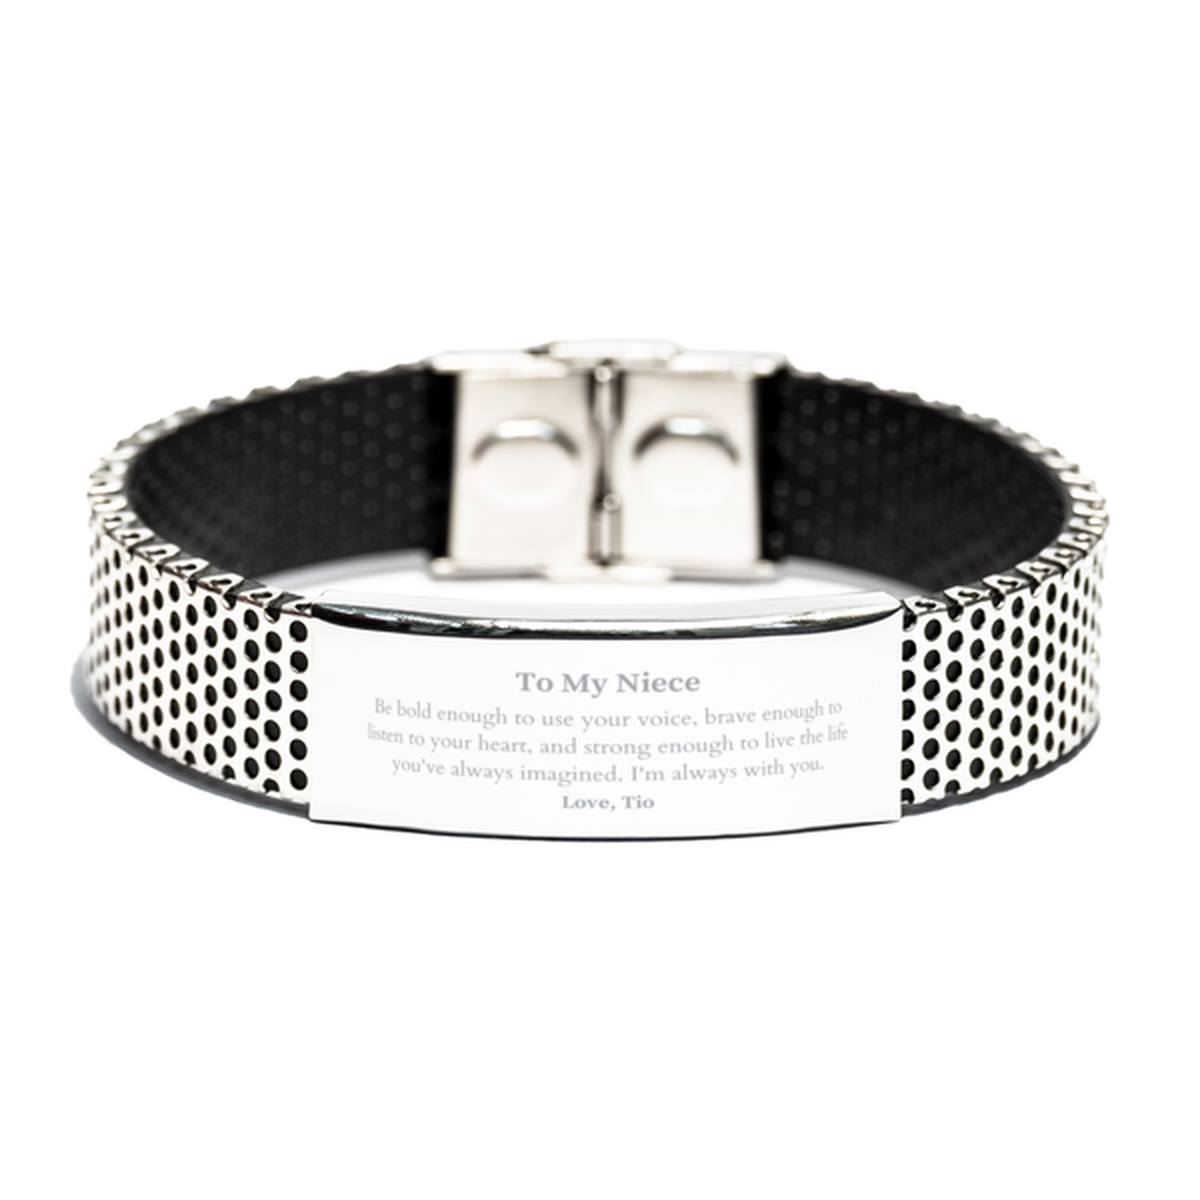 Keepsake Niece Stainless Steel Bracelet Gift Idea Graduation Christmas Birthday Niece from Tio, Niece Be bold enough to use your voice, brave enough to listen to your heart. Love, Tio